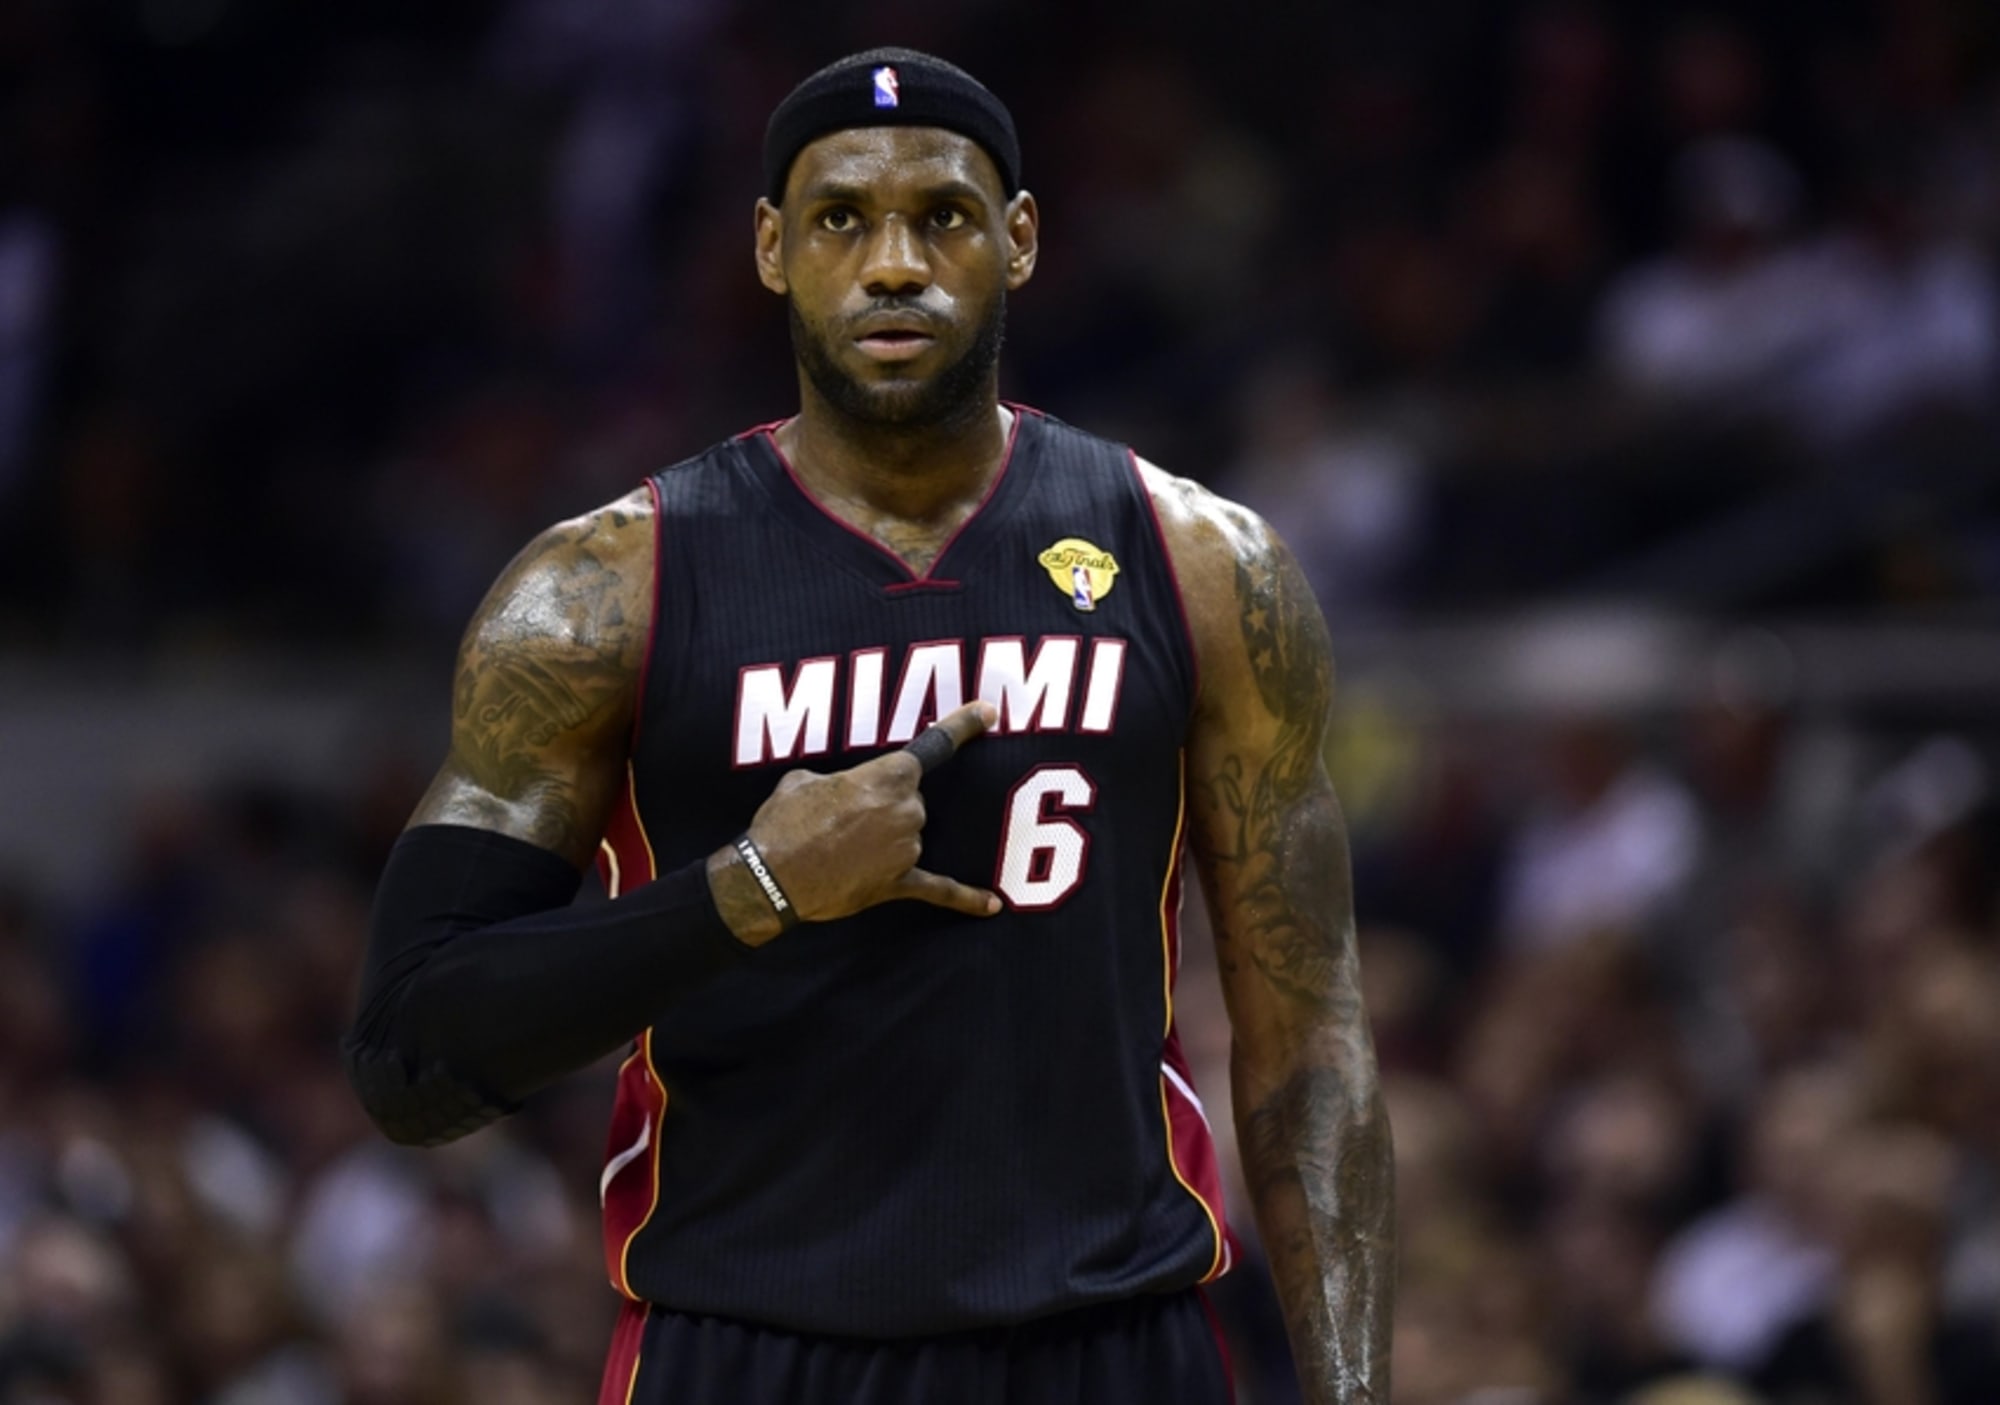 LeBron on fire for Heat, Basketball